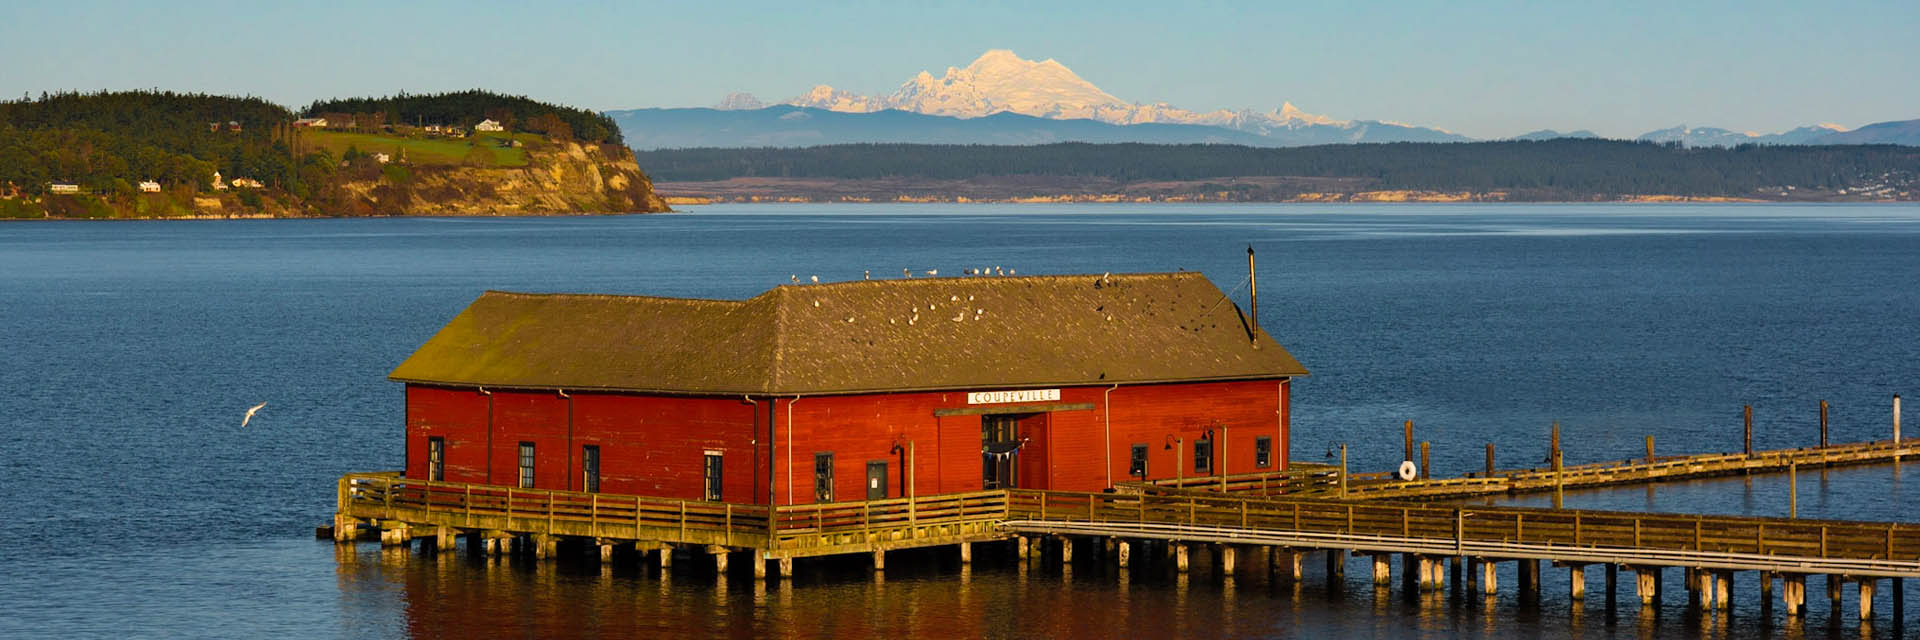 Coupeville Dock, Whidbey Island